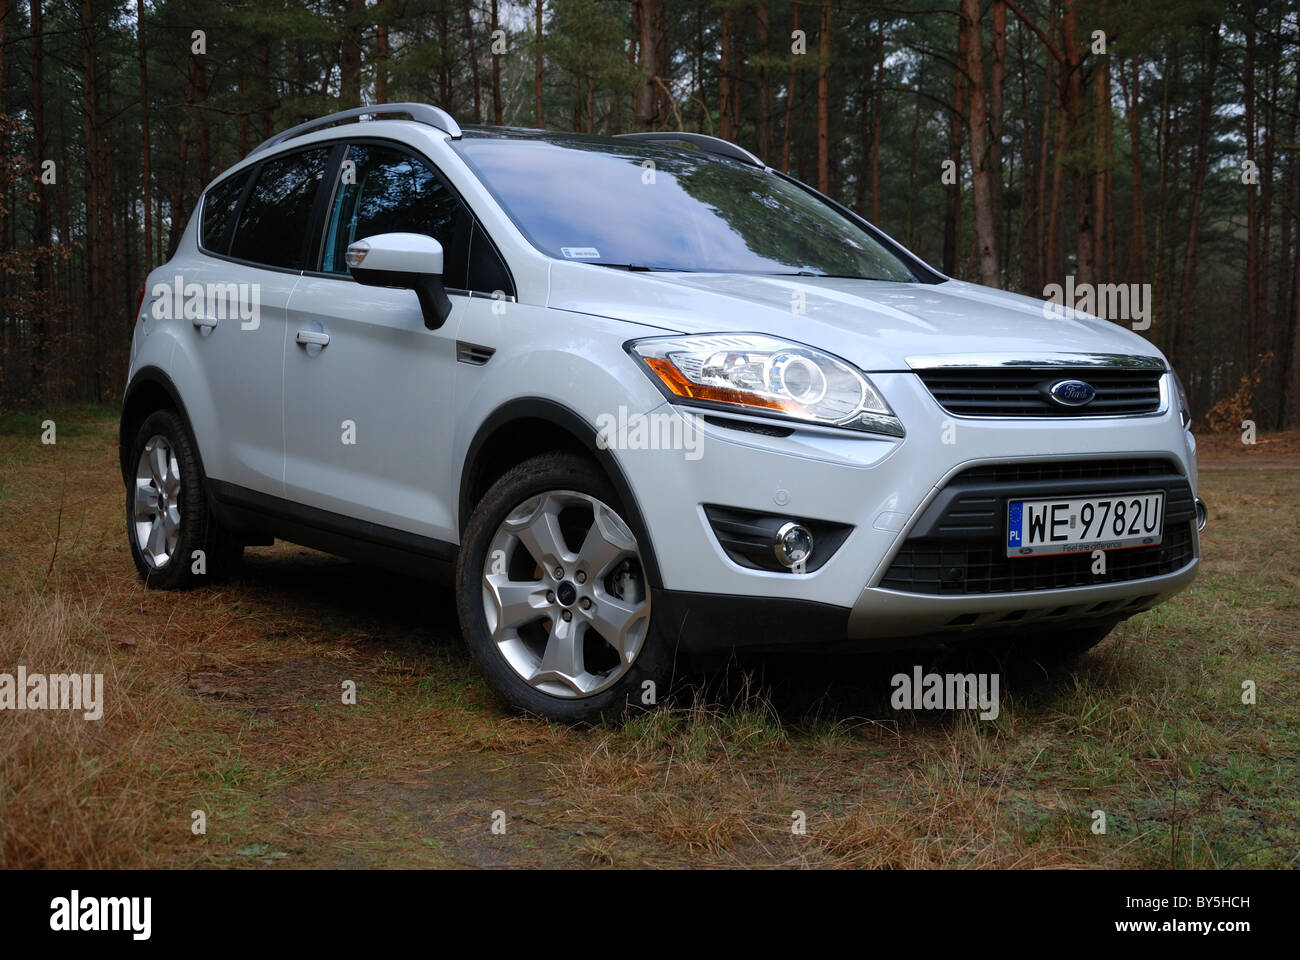 Ford Kuga 2.0 TDCI AWD PowerShift - MY 2008 - white pearl metallic - five  doors (5D) - Popular German compact SUV - in forest Stock Photo - Alamy